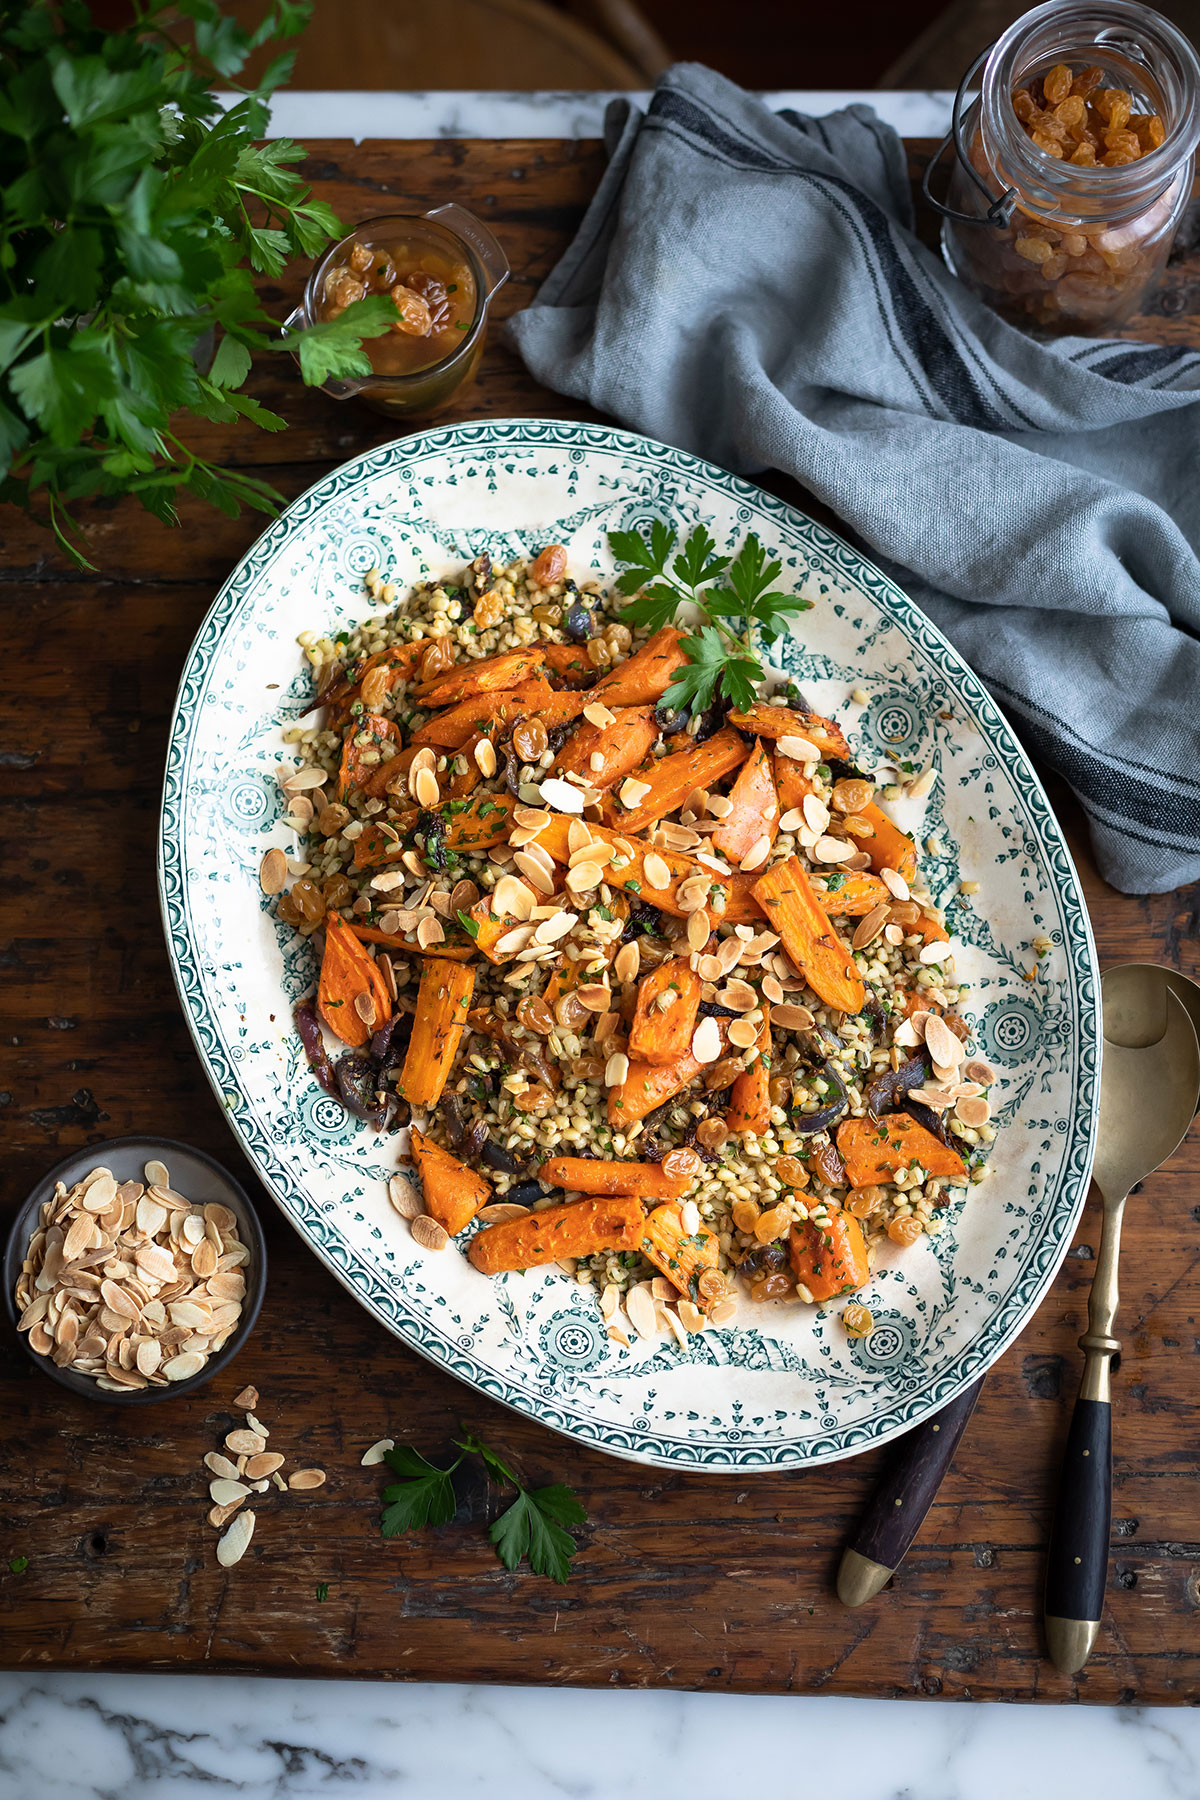 A large platter with roast carrot and barley salad with pickled sultanas